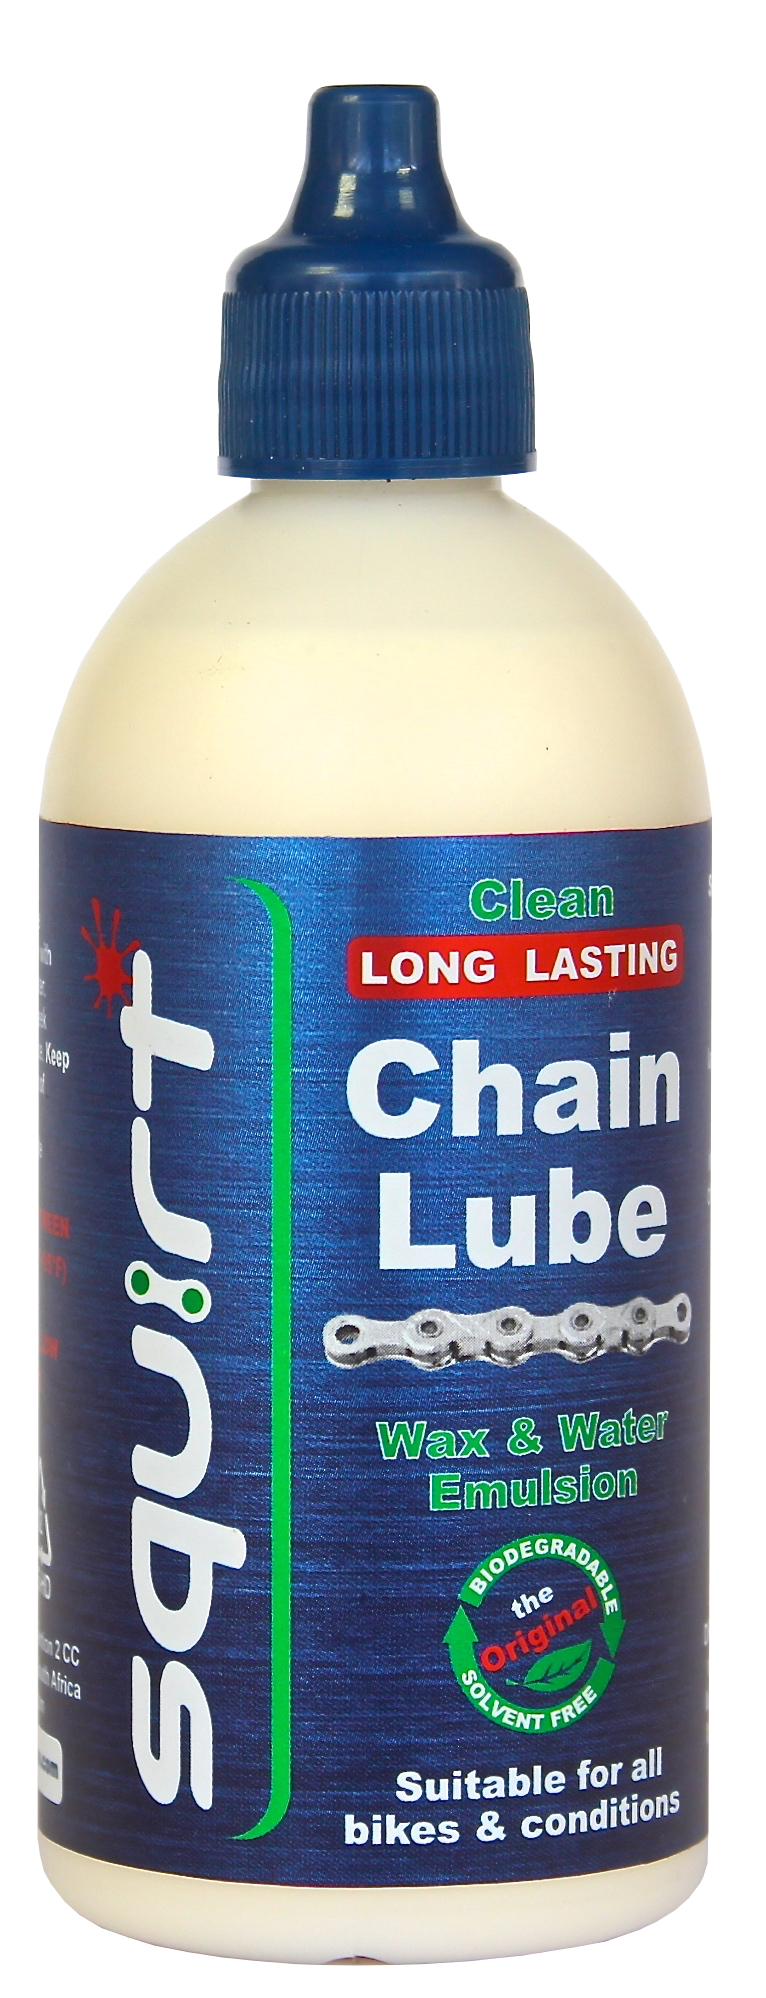 Squirt chain lube low temperature